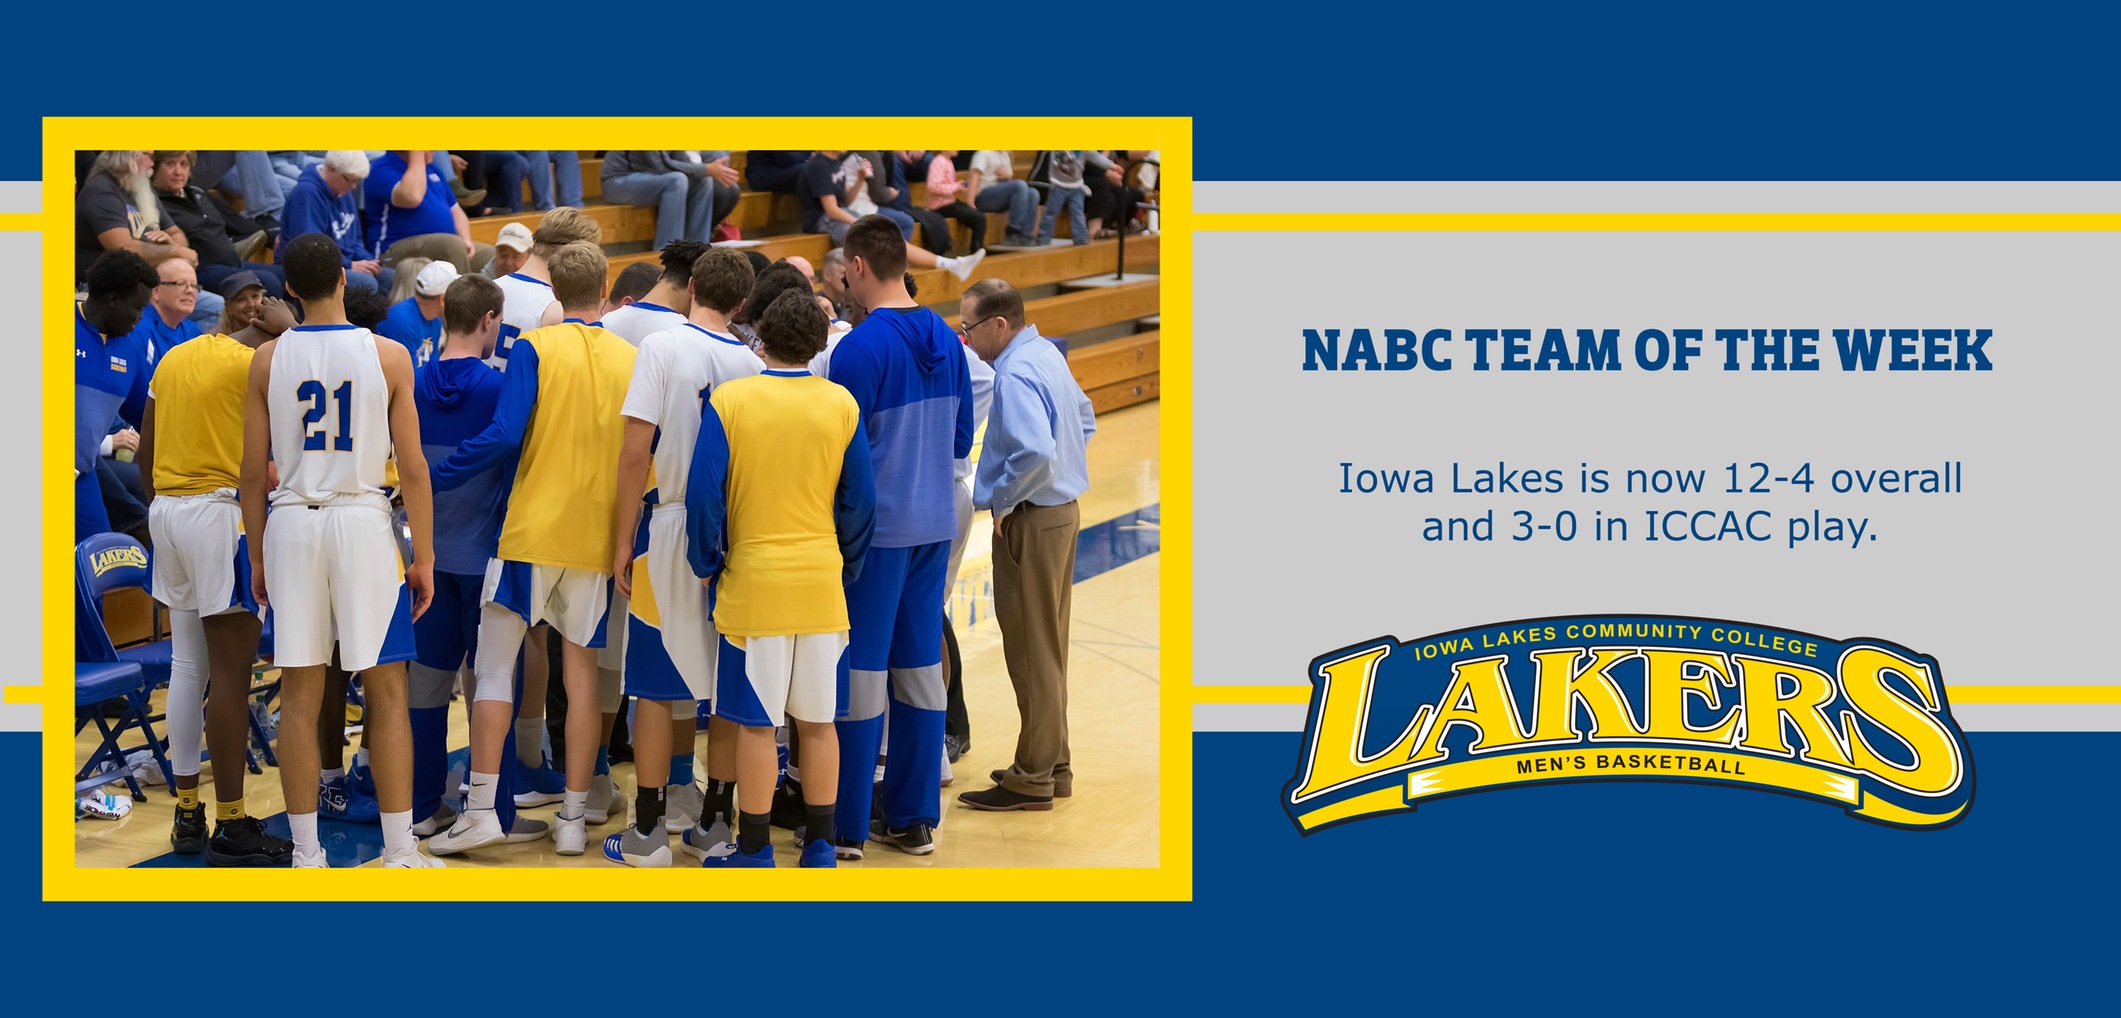 Lakers named National Team of the Week